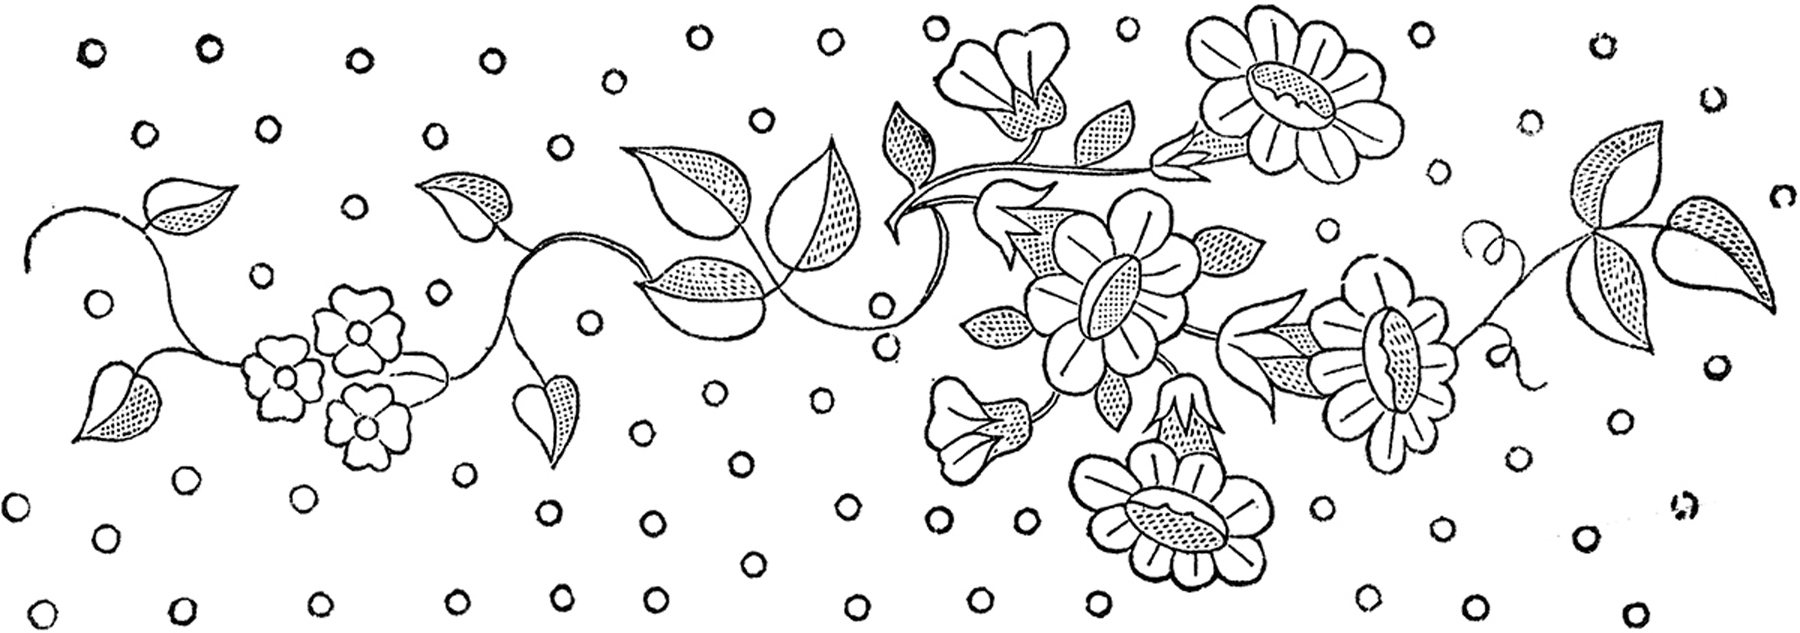 Embroidery On Paper Free Patterns Floral Embroidery Patterns Pretty The Graphics Fairy